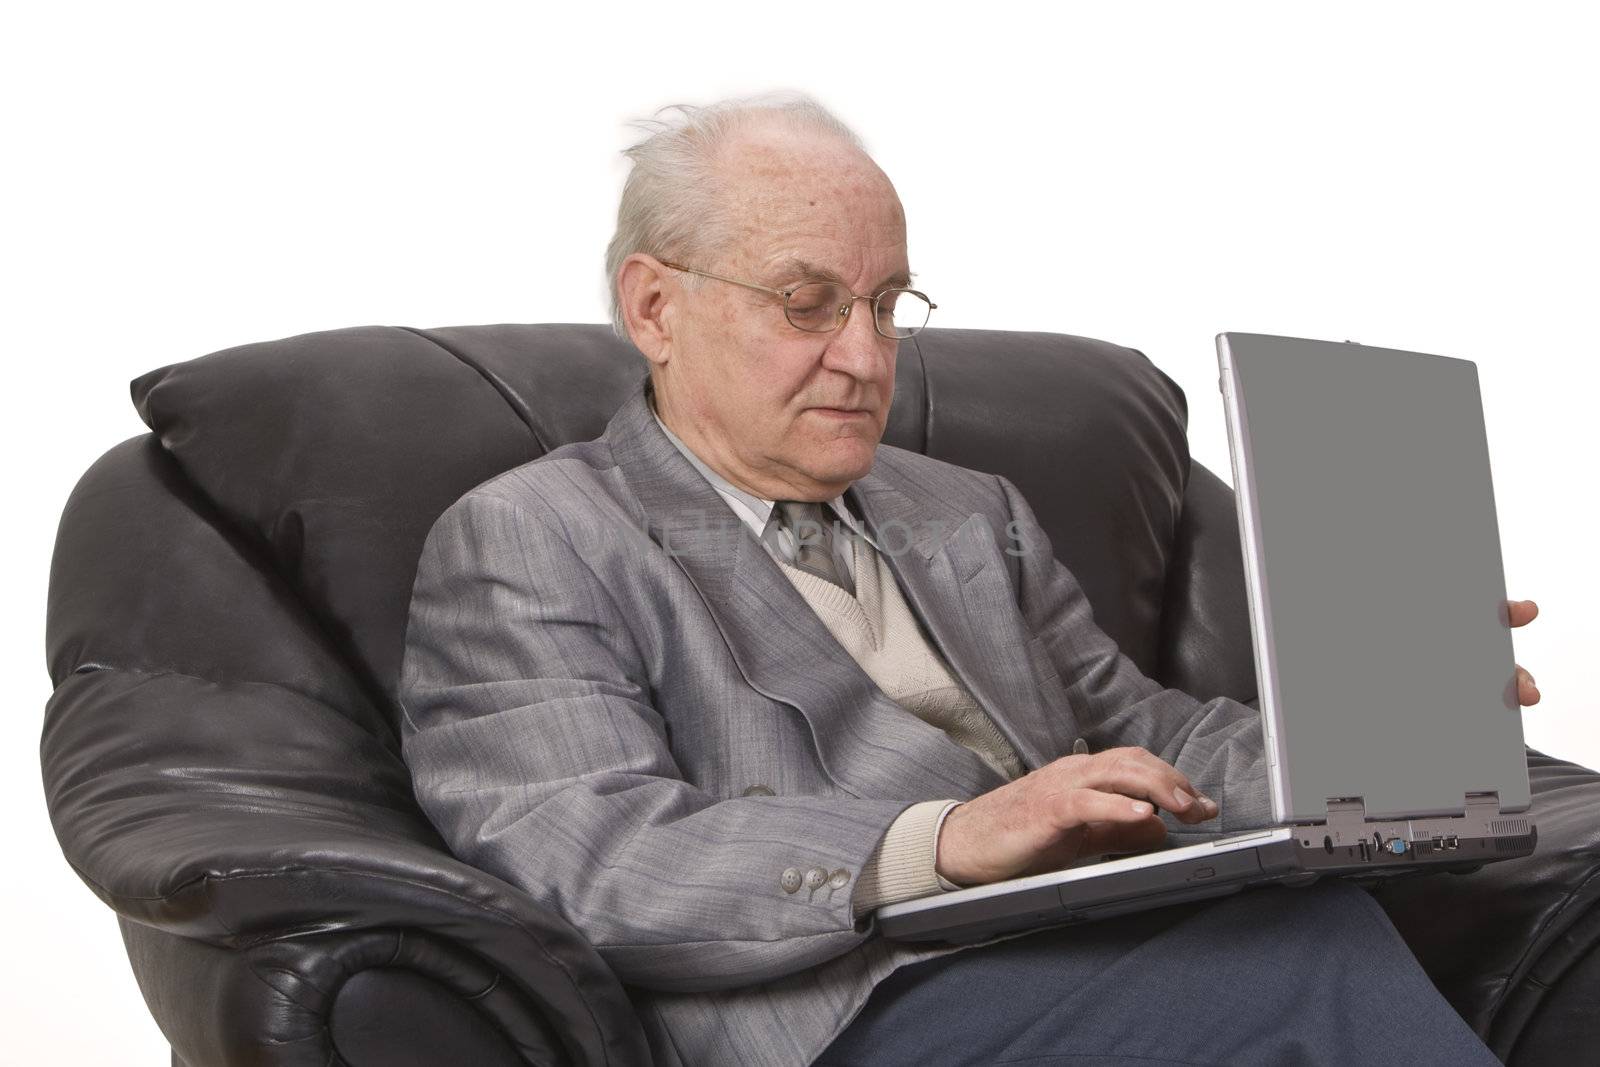 Close-up image of a senior man using a laptop.Shot with Canon 70-200mm f/2.8L IS USM